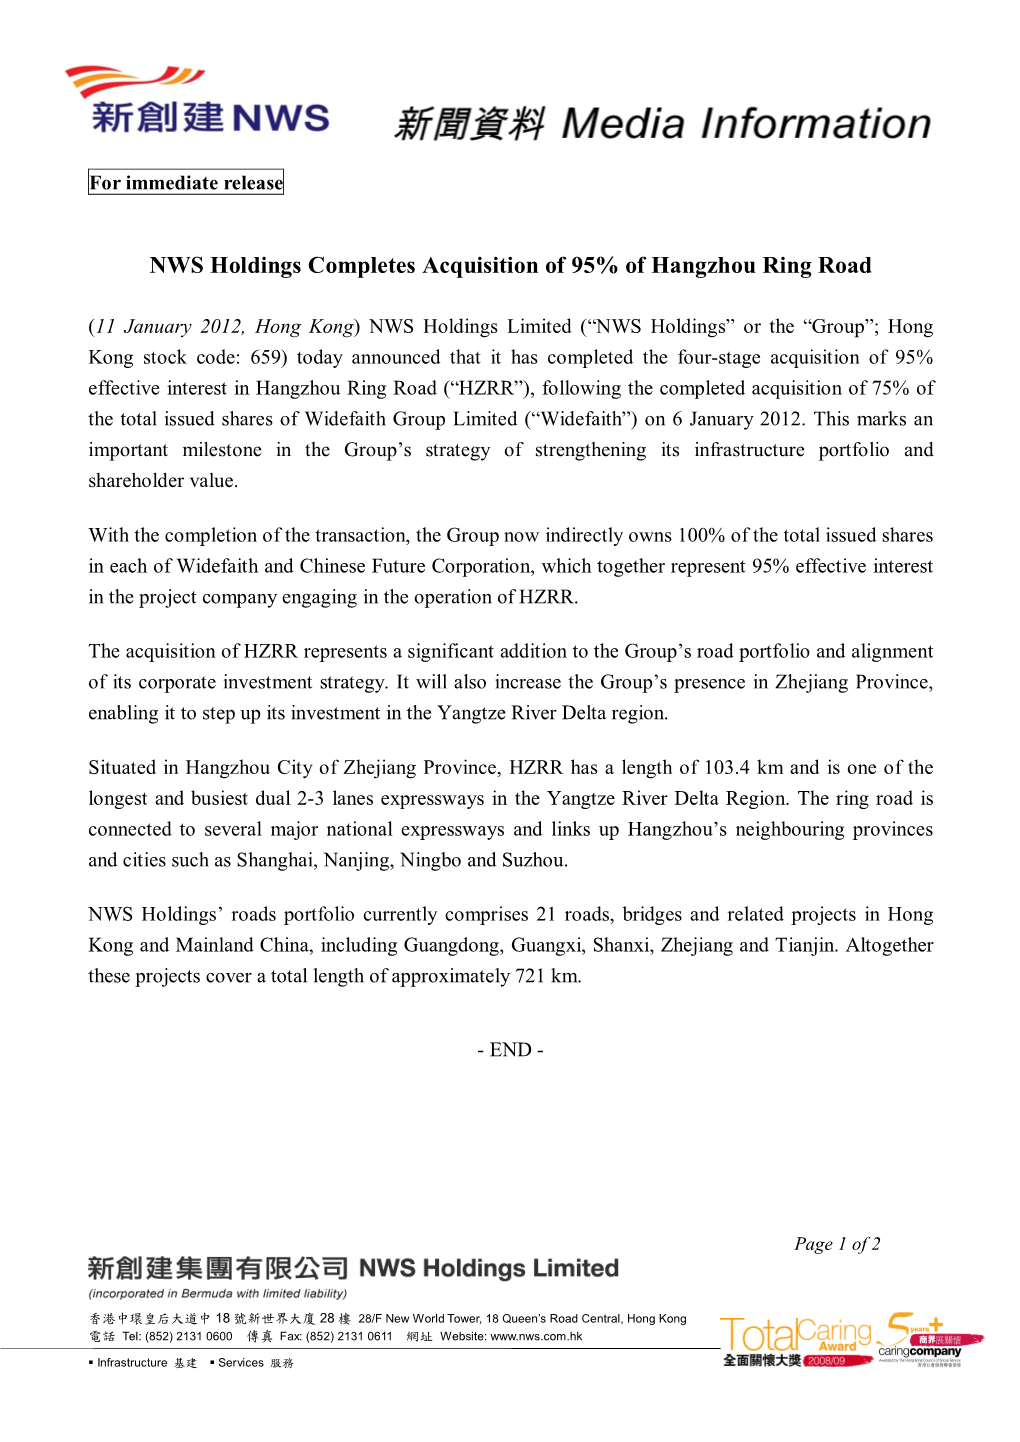 NWS Holdings Completes Acquisition of 95% of Hangzhou Ring Road